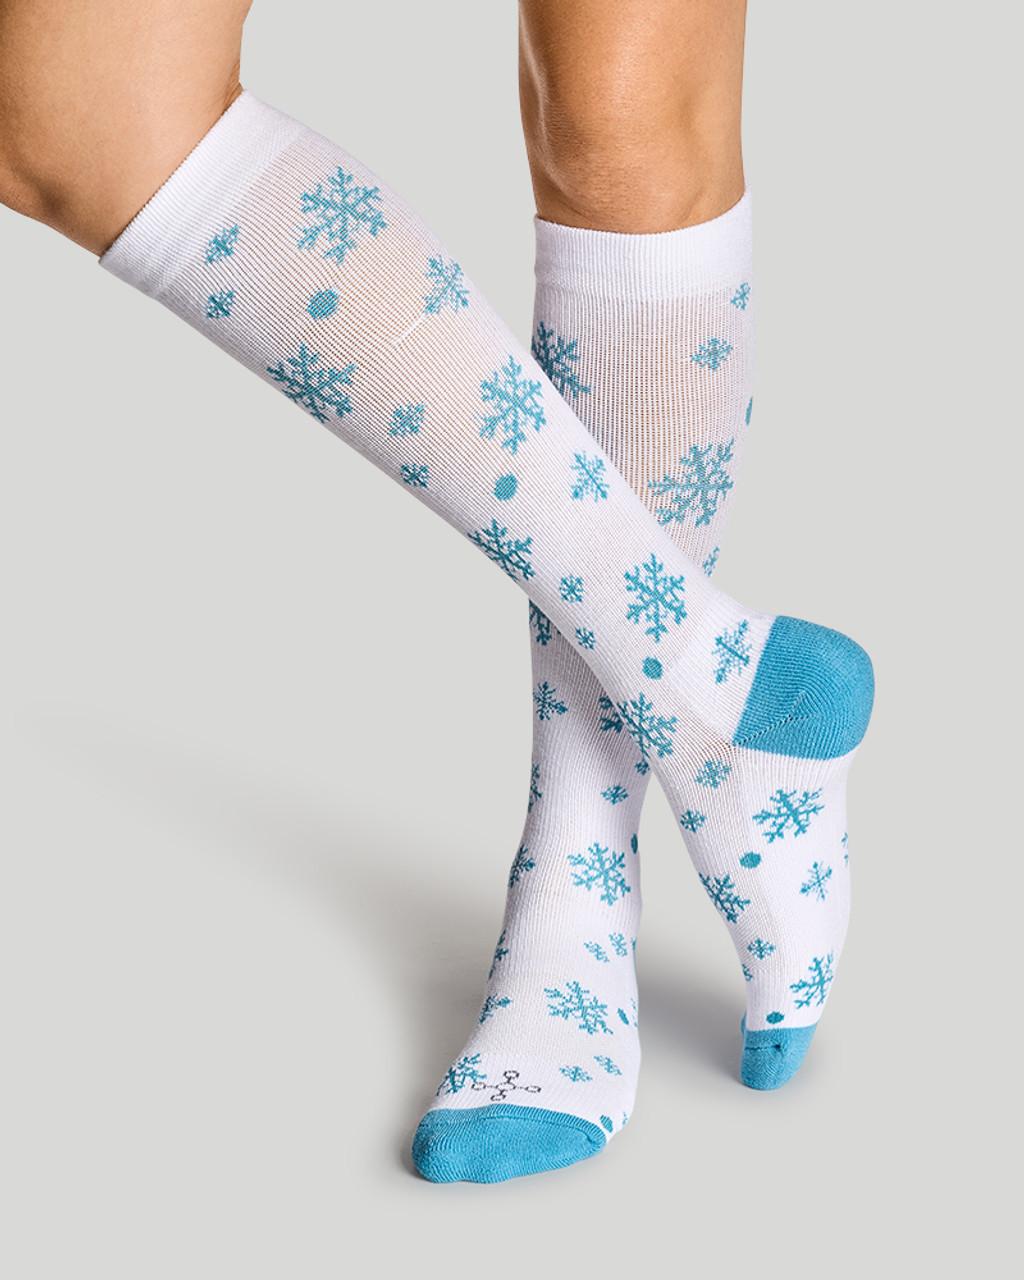 Holiday Compression Socks | Women's Over The Calf